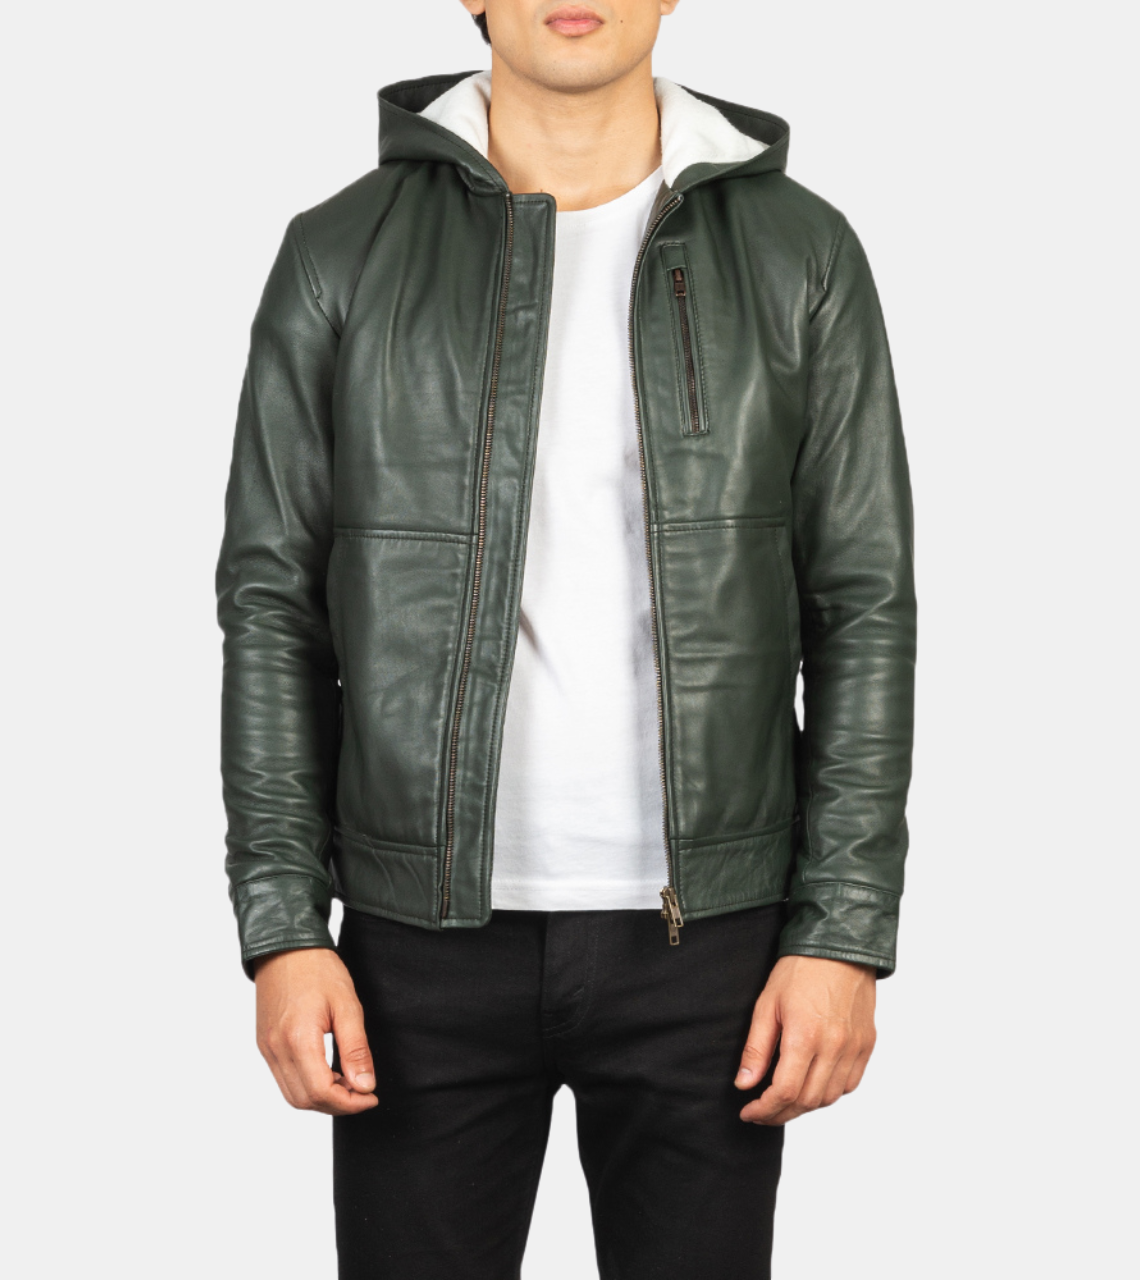 Iridess Men's Green Hooded Leather Jacket